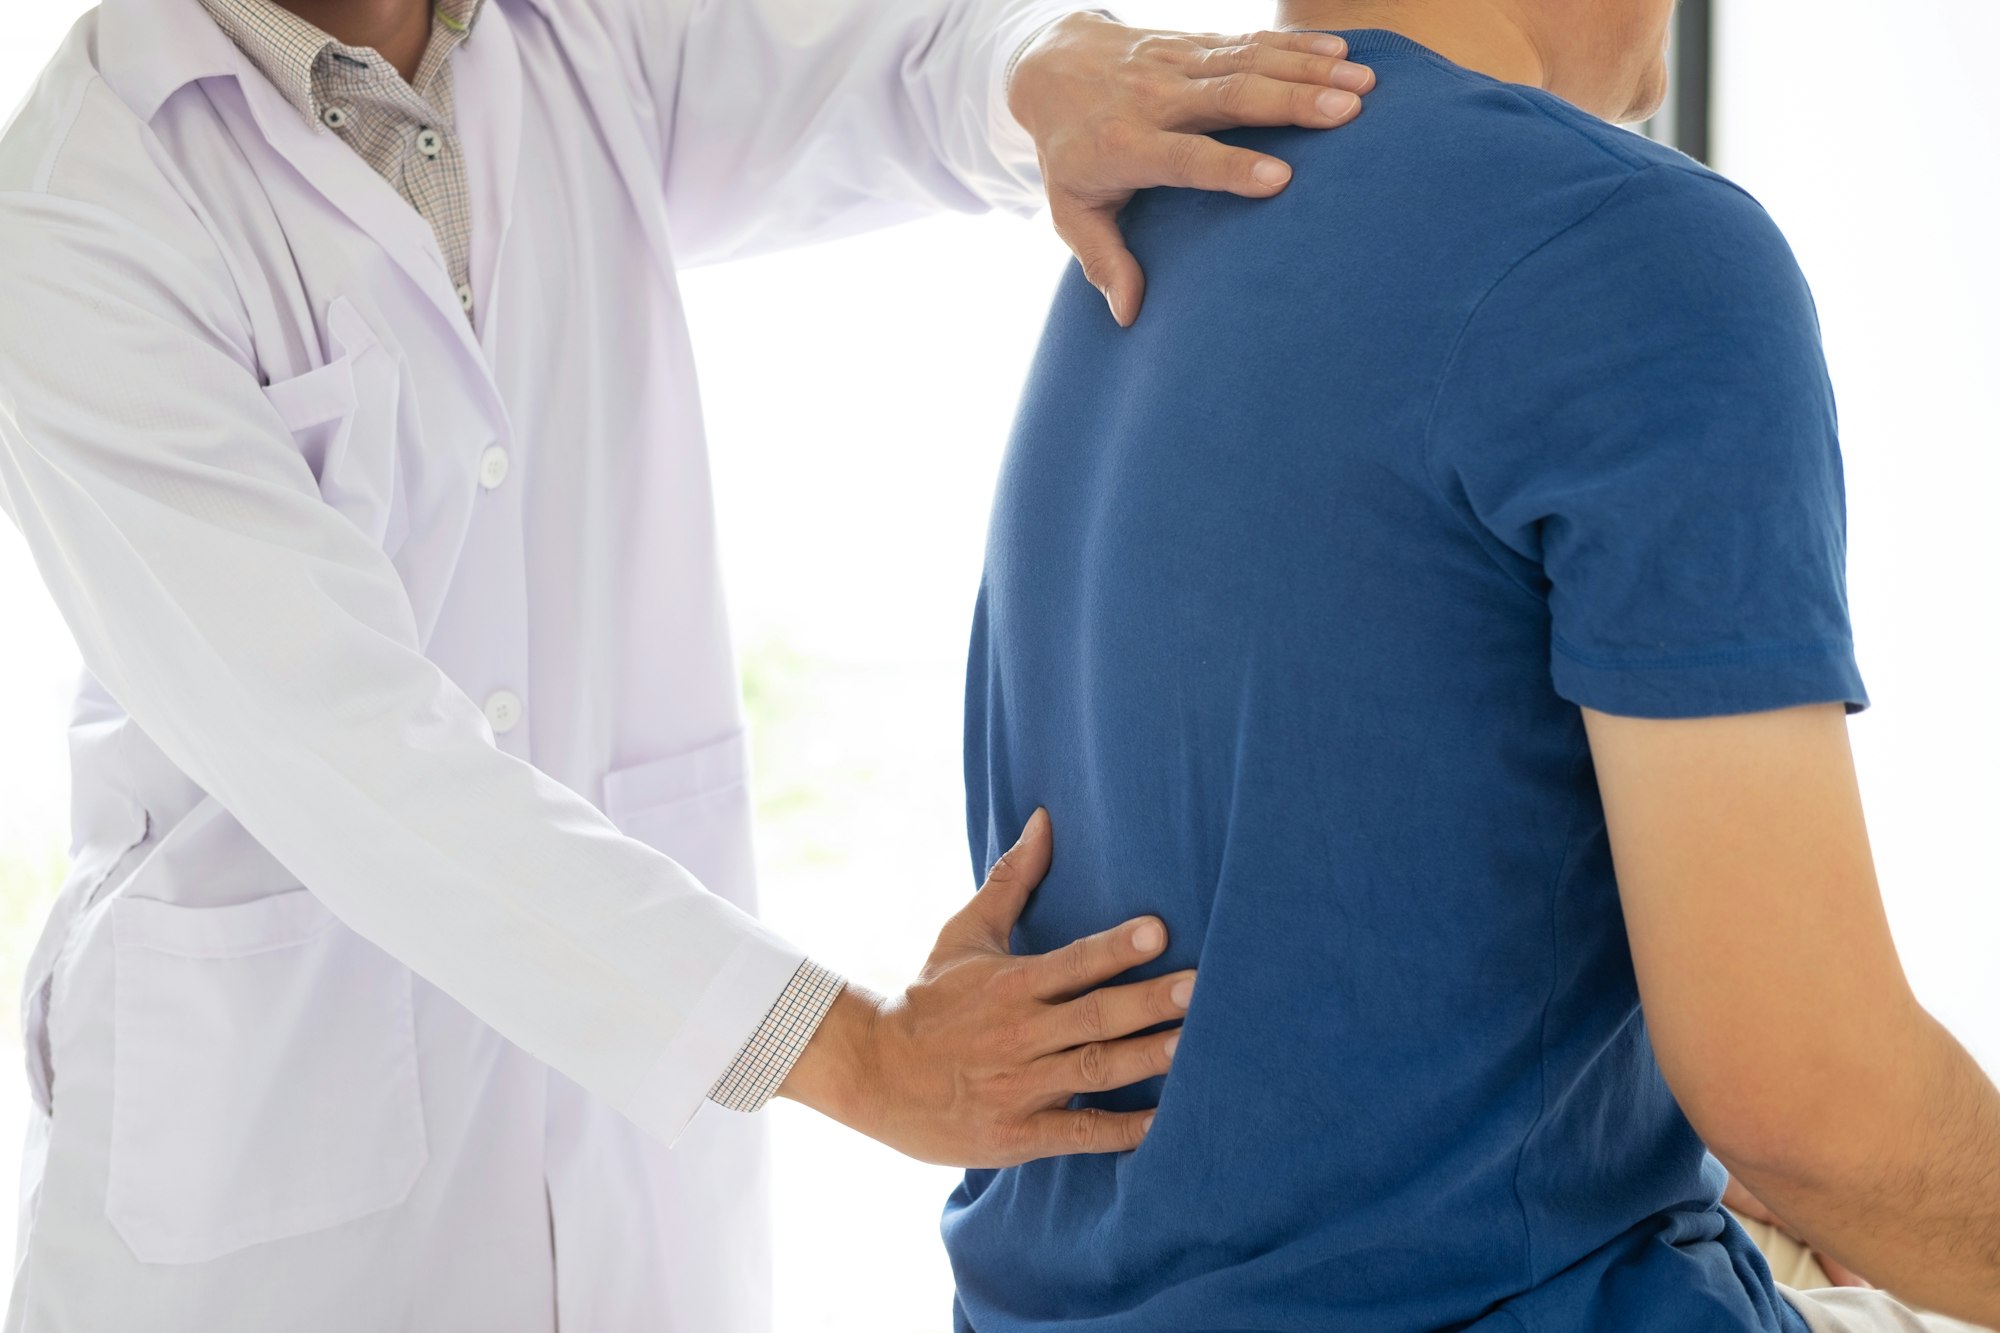 Doctor physiotherapist treating lower back pain patient after while giving exercising treatment on